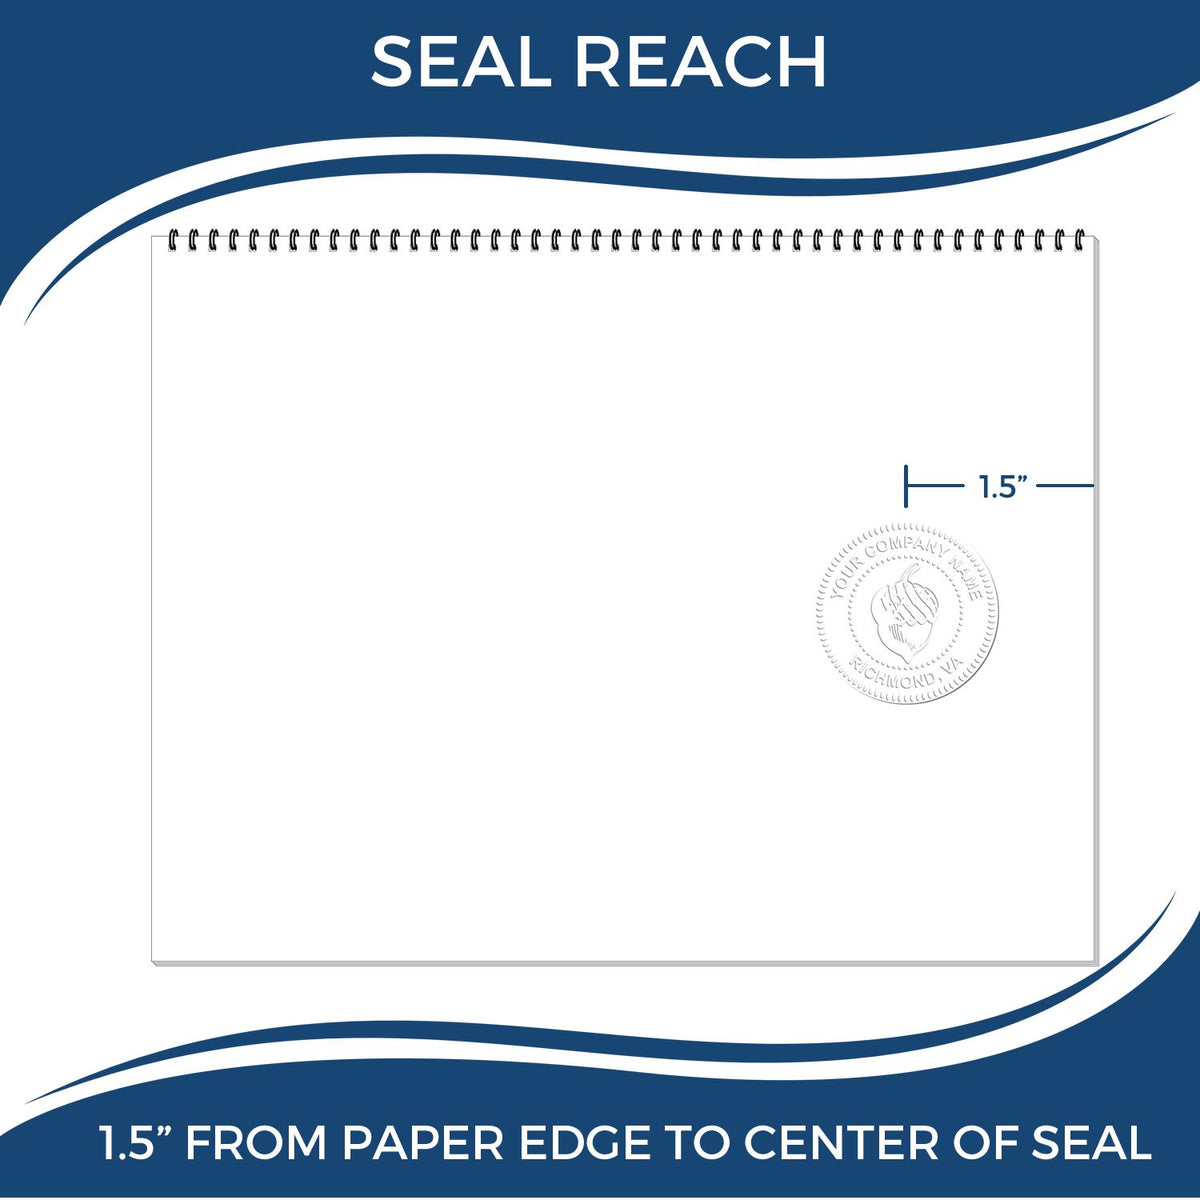 An infographic showing the seal reach which is represented by a ruler and a miniature seal image of the State of Connecticut Soft Land Surveyor Embossing Seal